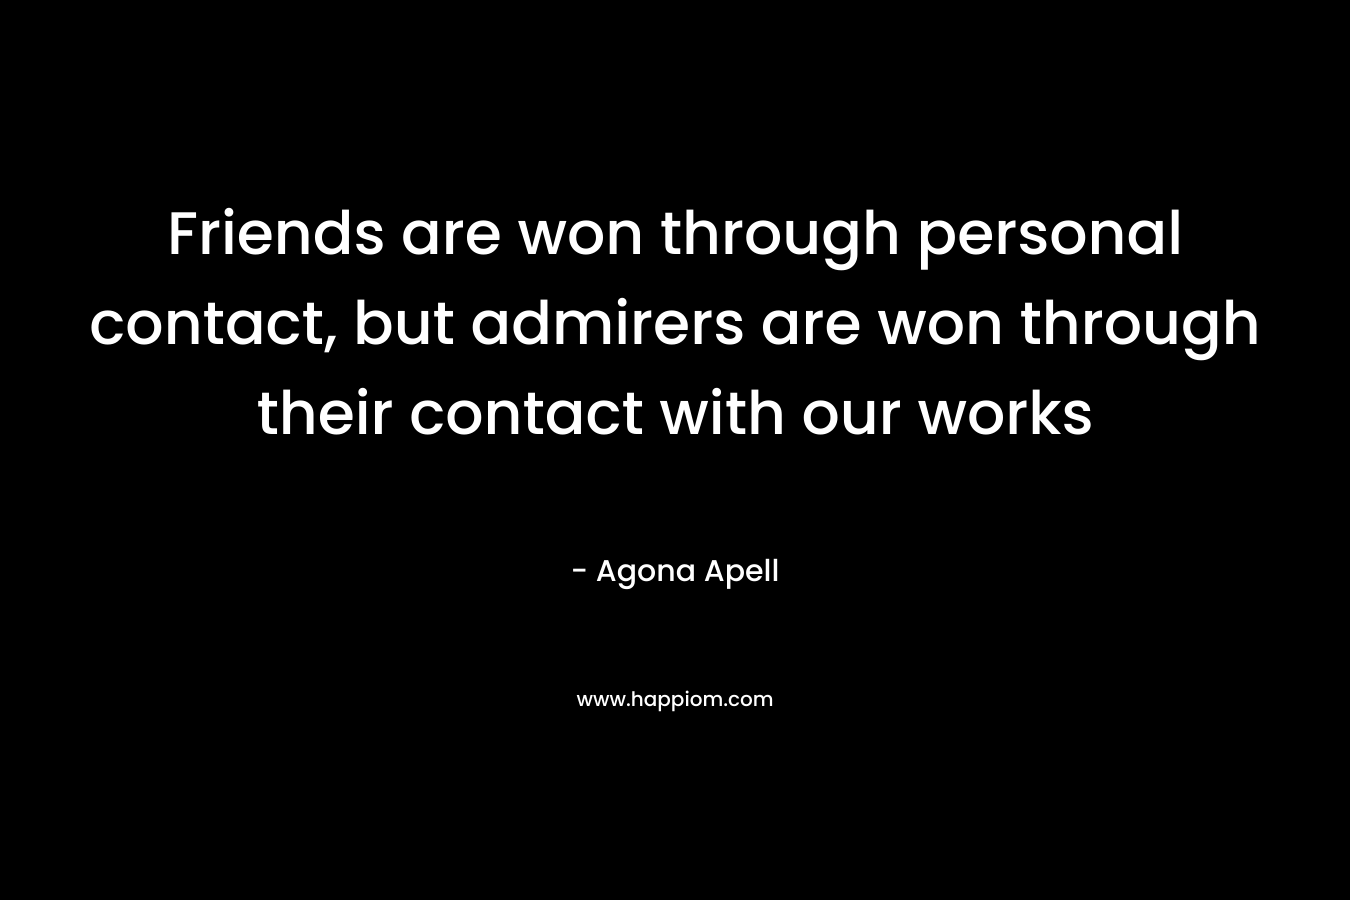 Friends are won through personal contact, but admirers are won through their contact with our works